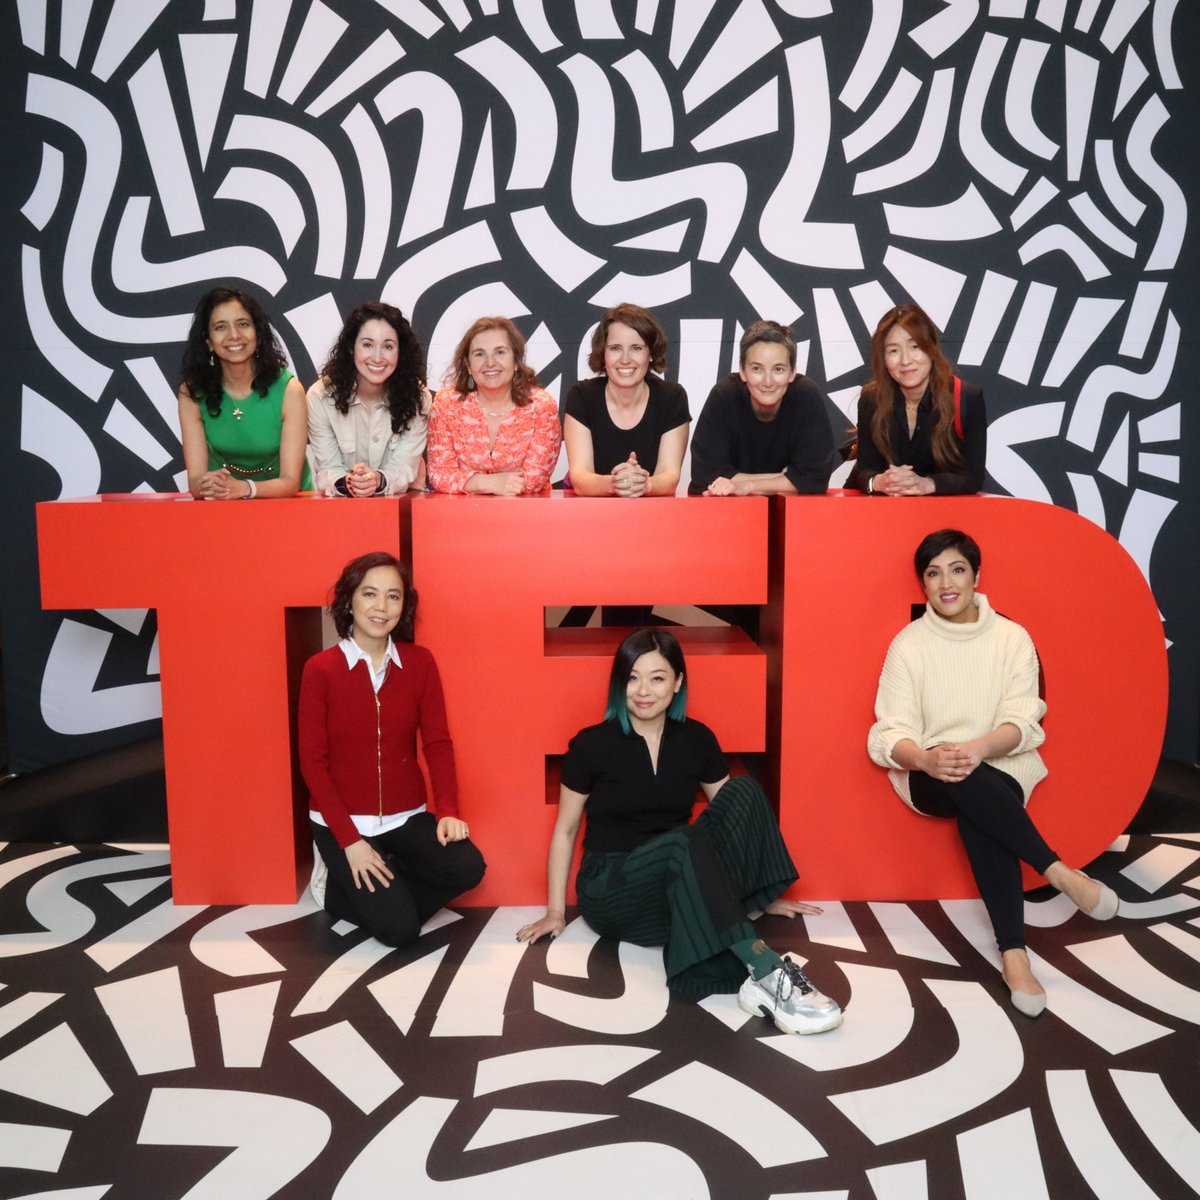 We took this on Day2 of #TED2024. Some #AI ROCK⭐️'s...@drfeifei Daniela Rus @MIT_CSAIL @hlntnr @YejinChoinka @ruchowdh Niceaunties. And speaking today @CatieCuan + @AnimaAnandkumar ...oh...and then there's me🤣